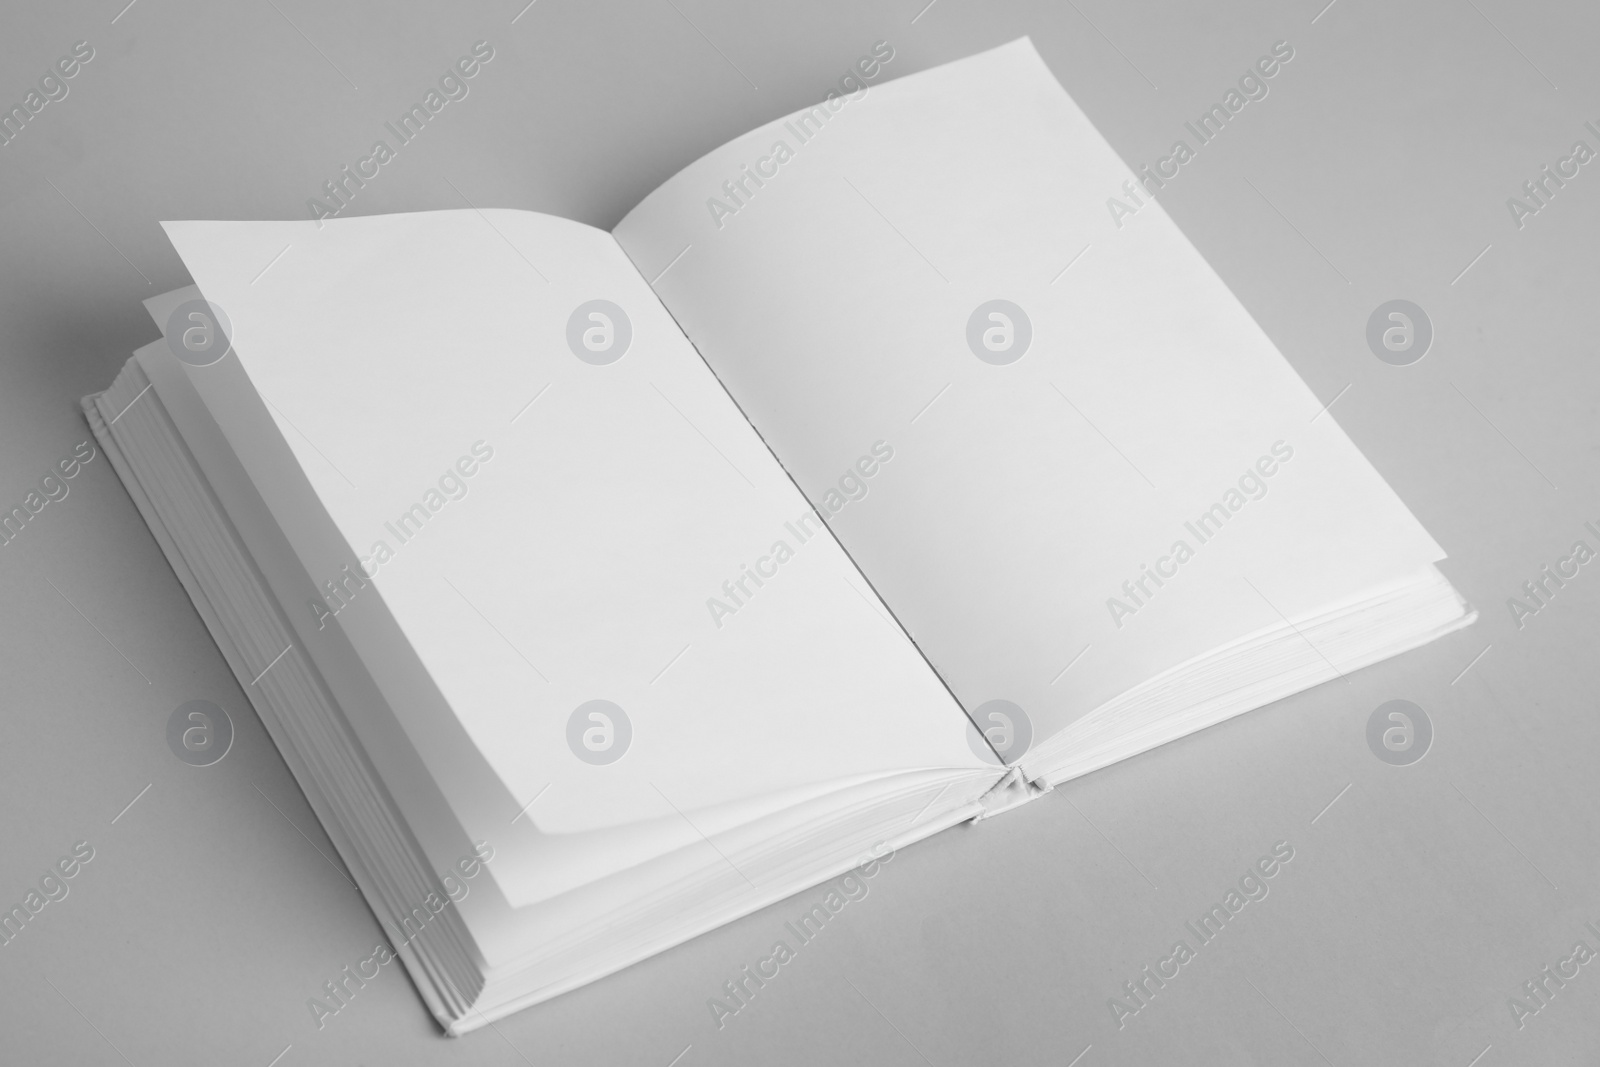 Photo of Open book with blank pages on grey background